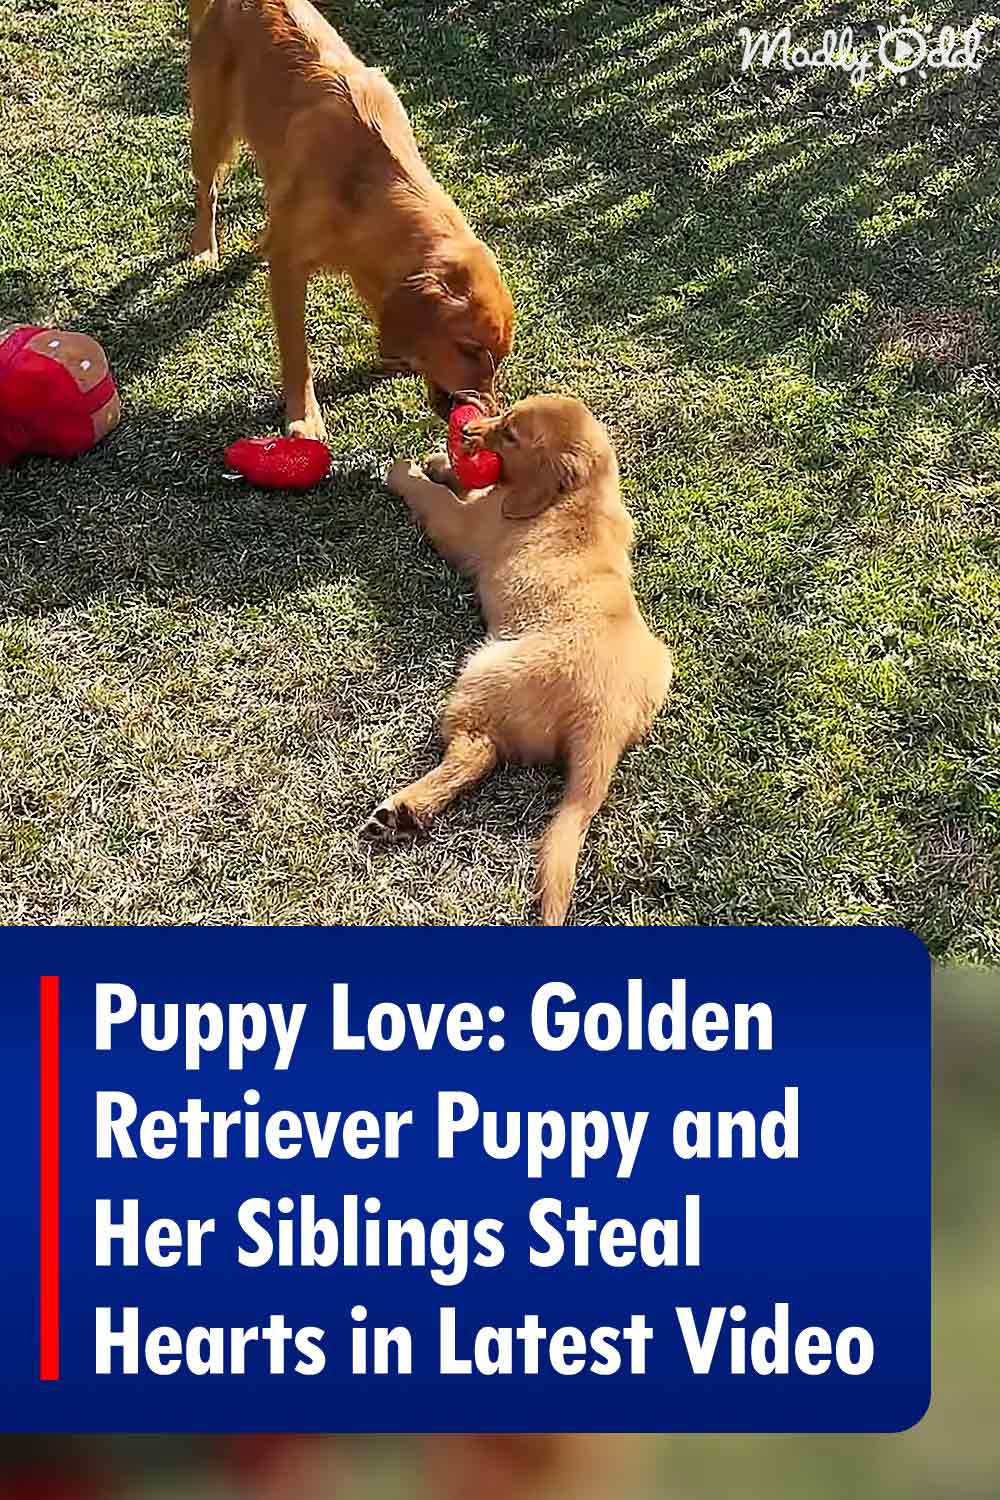 Puppy Love: Golden Retriever Puppy and Her Siblings Steal Hearts in Latest Video